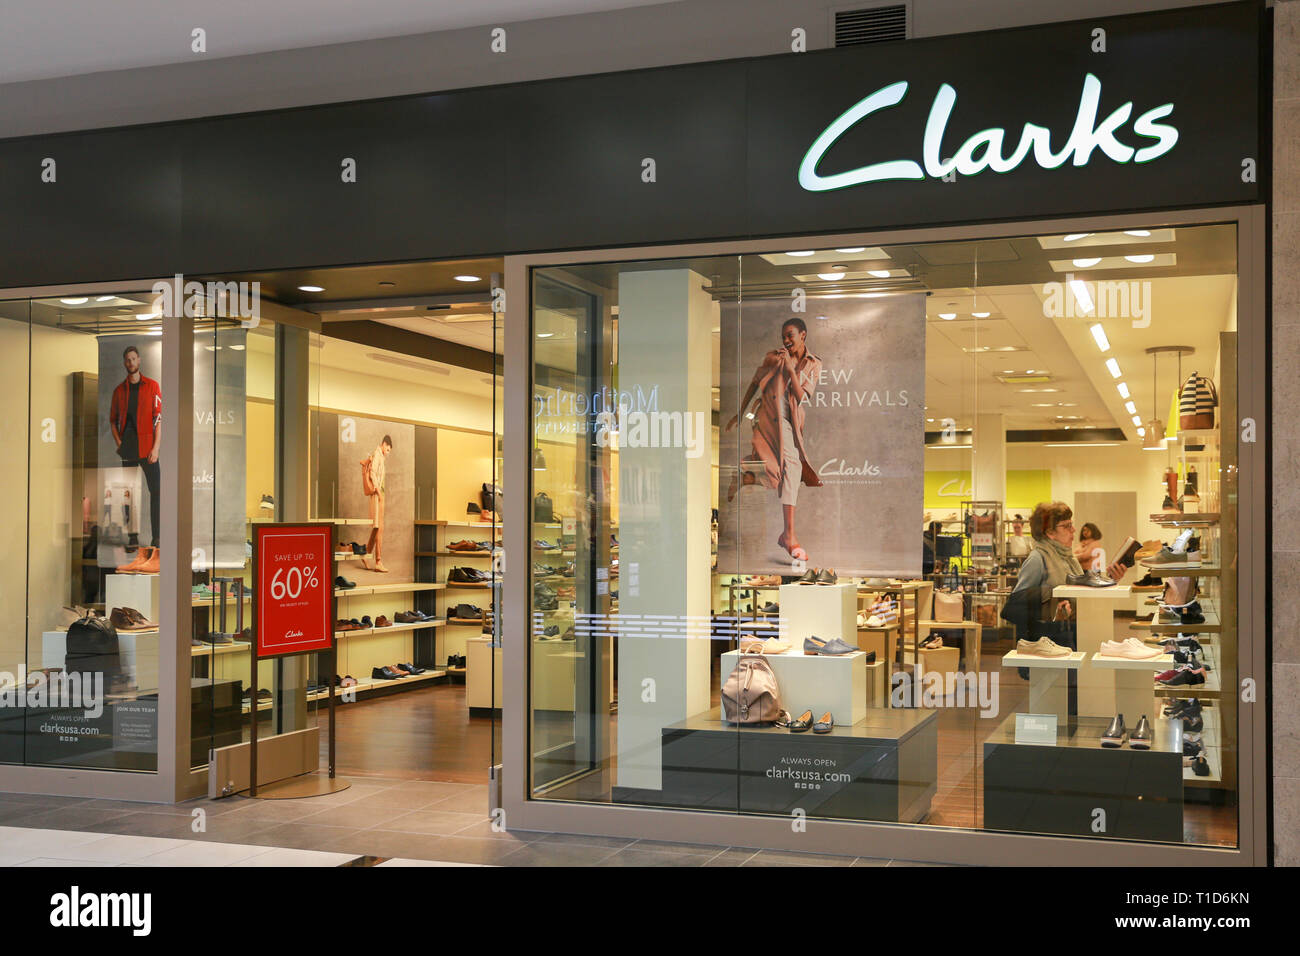 clarks shoes outlet stores